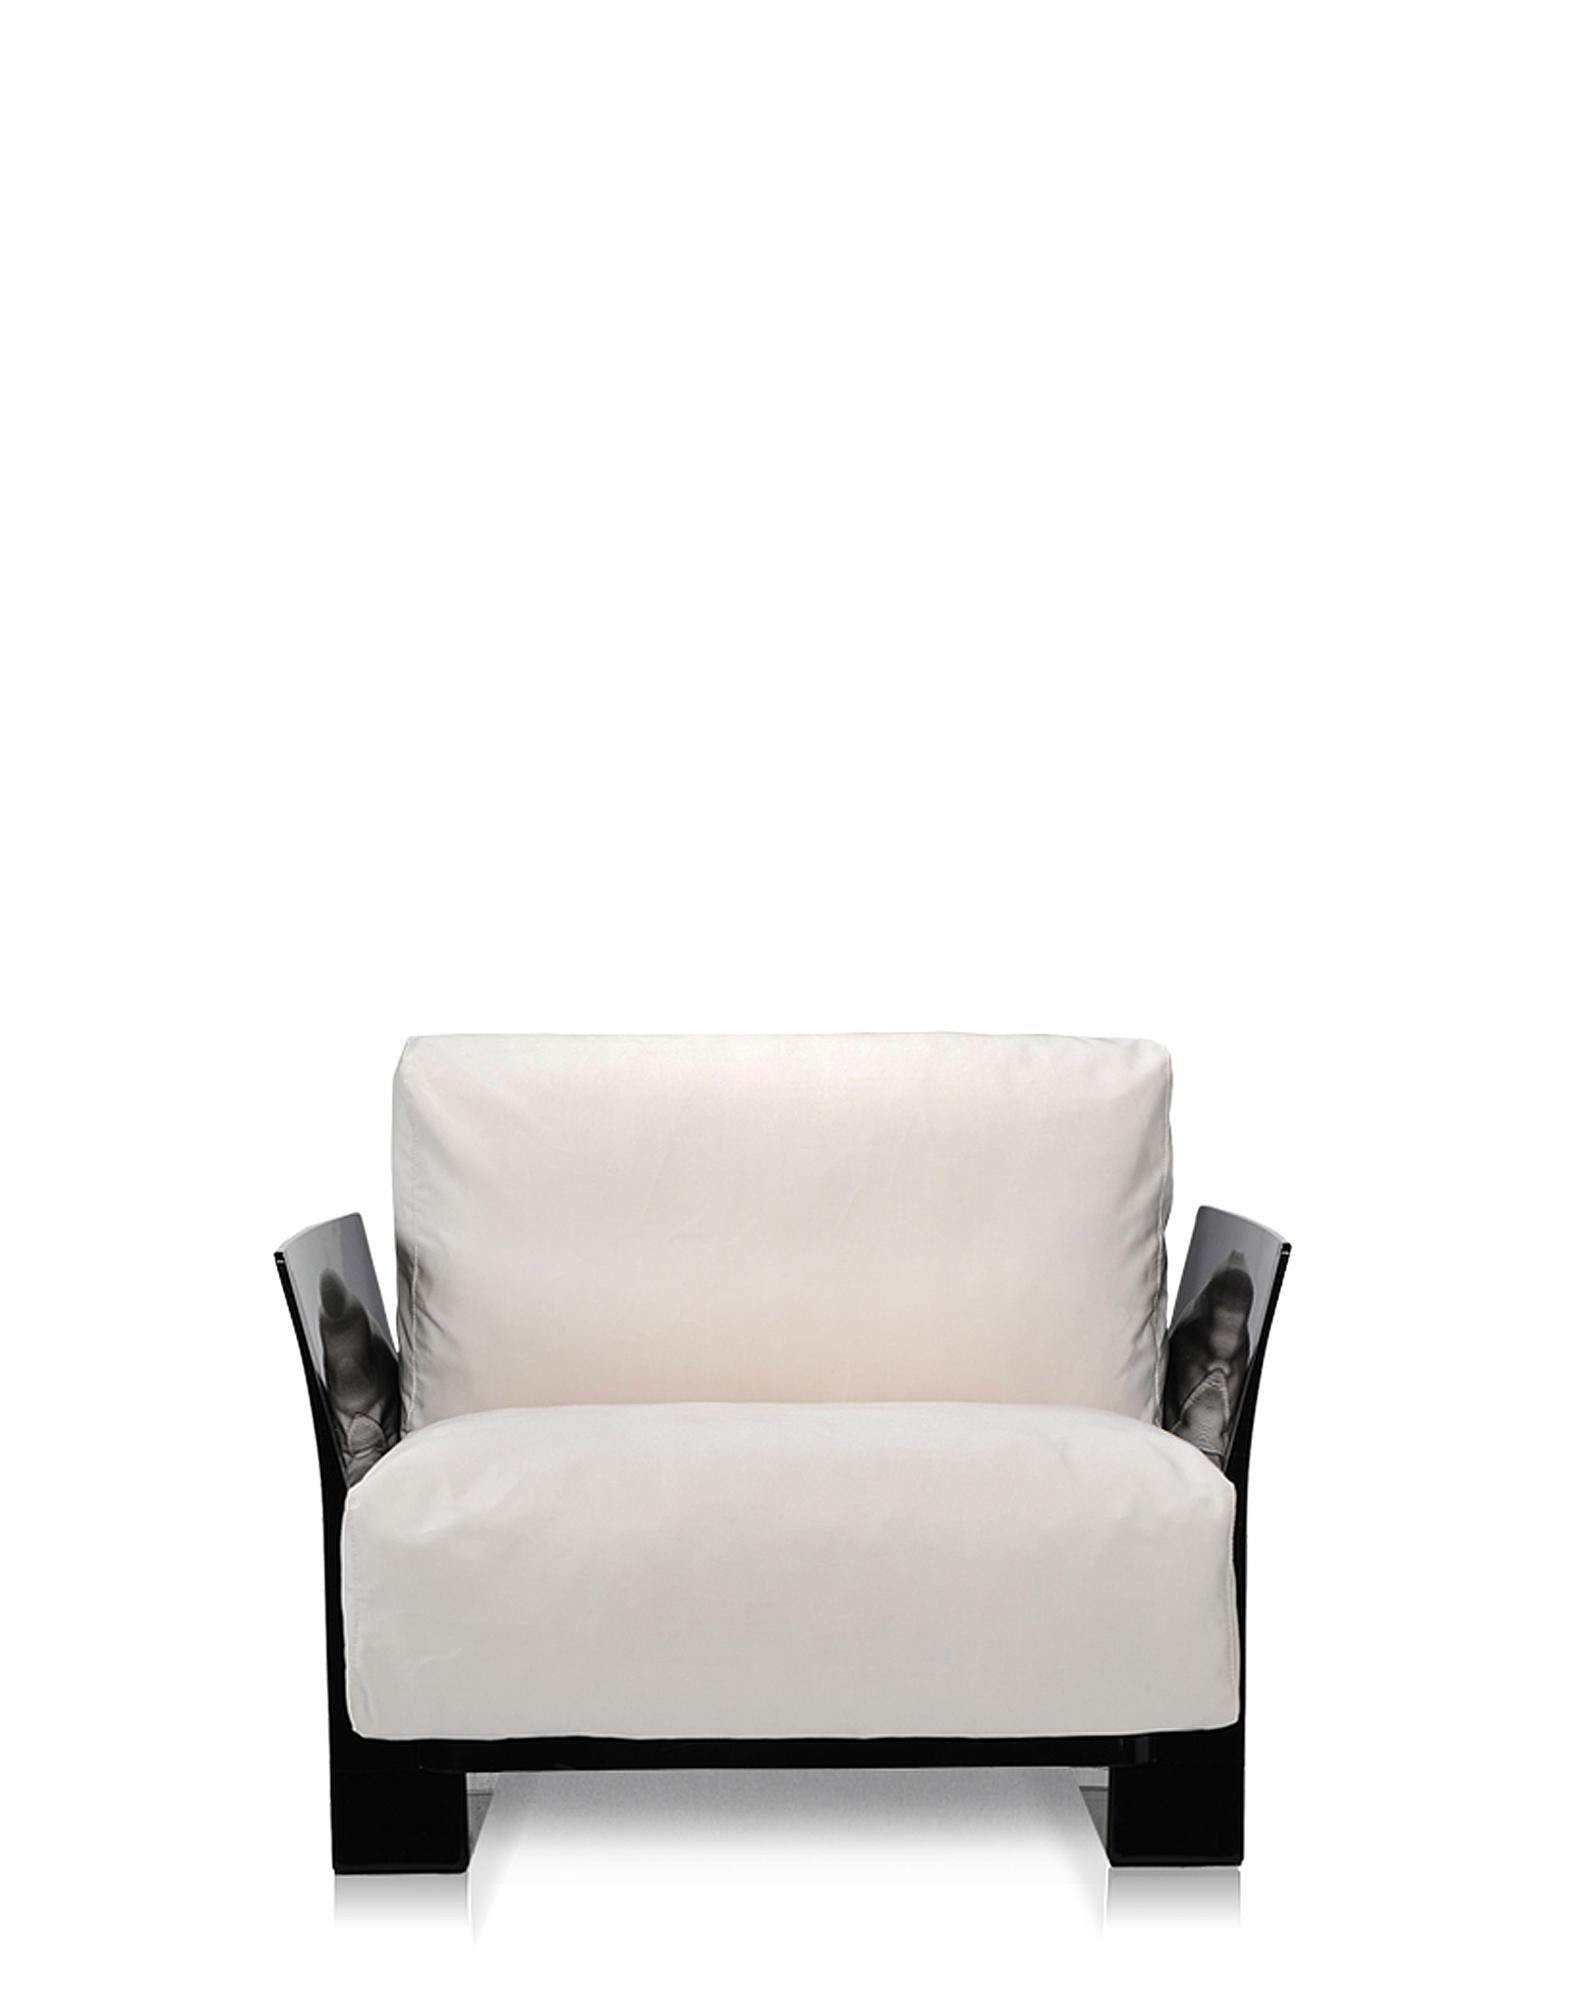 Modern Kartell Pop Outdoor Armchair in White by Piero Lissoni For Sale